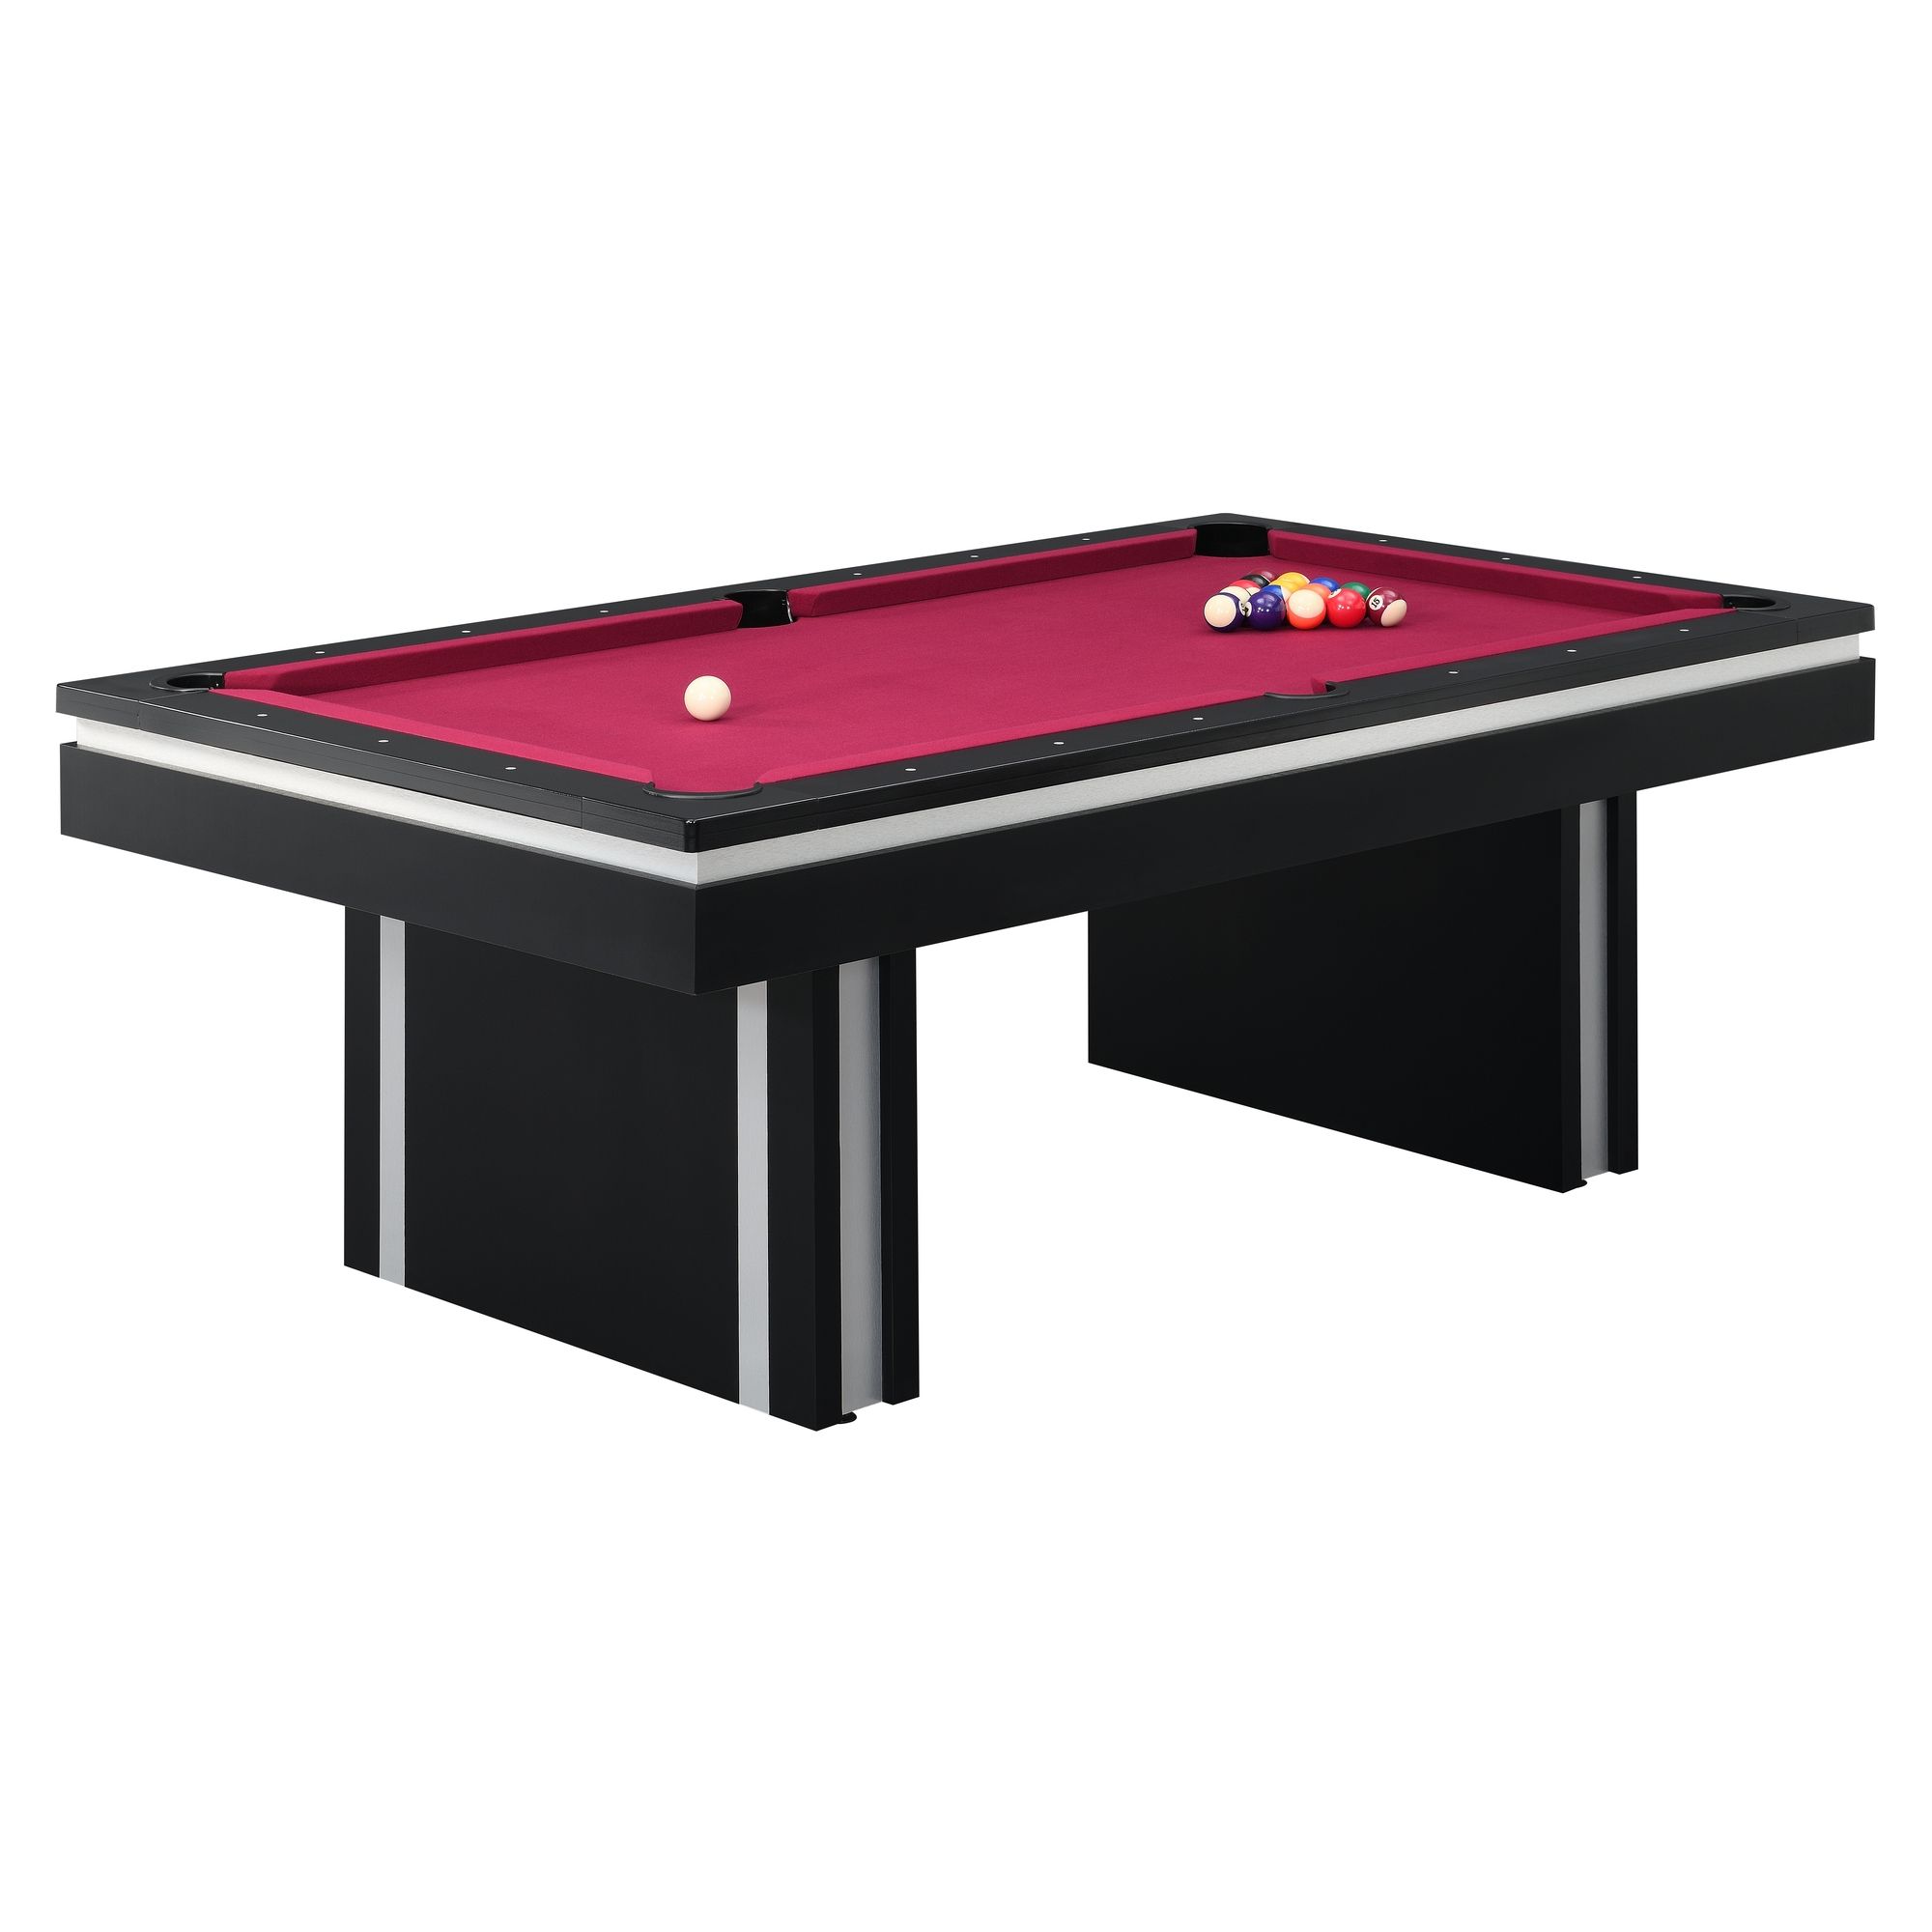 Rent To Own Elements International 84 Billiard Table At Aaron S